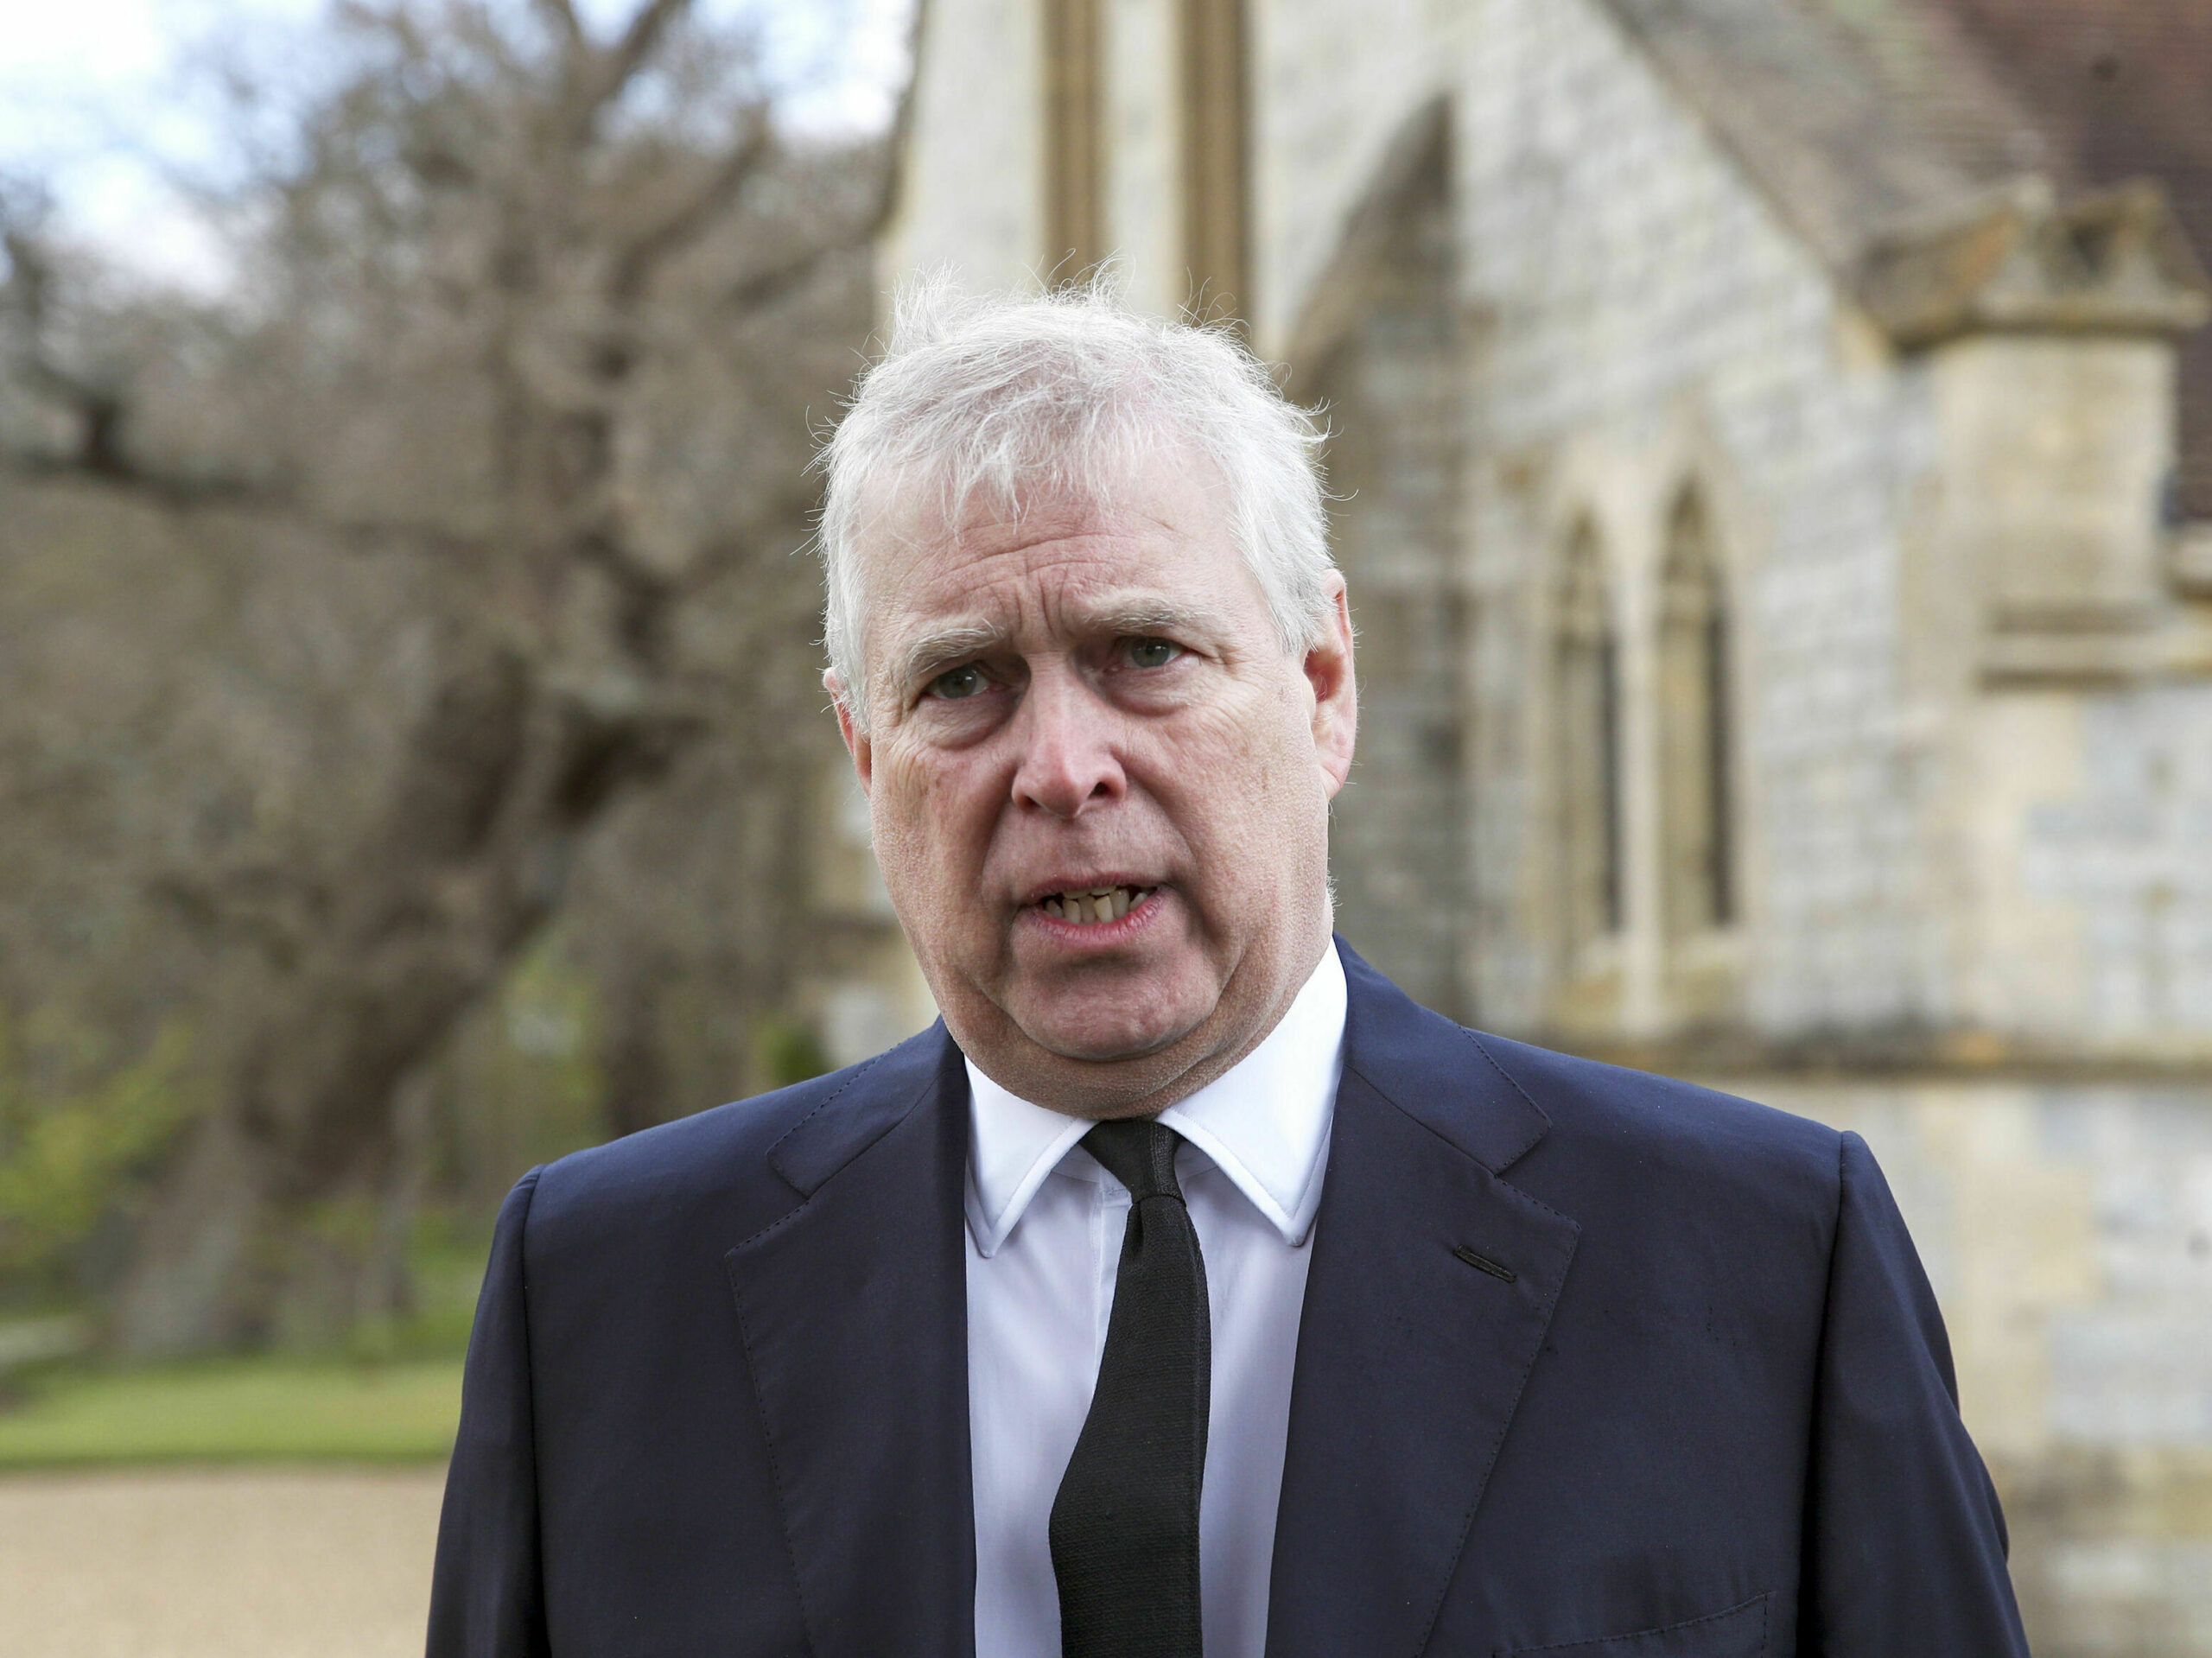 ‘A masterclass in how to give terrible answers’: Inside that Prince Andrew interview